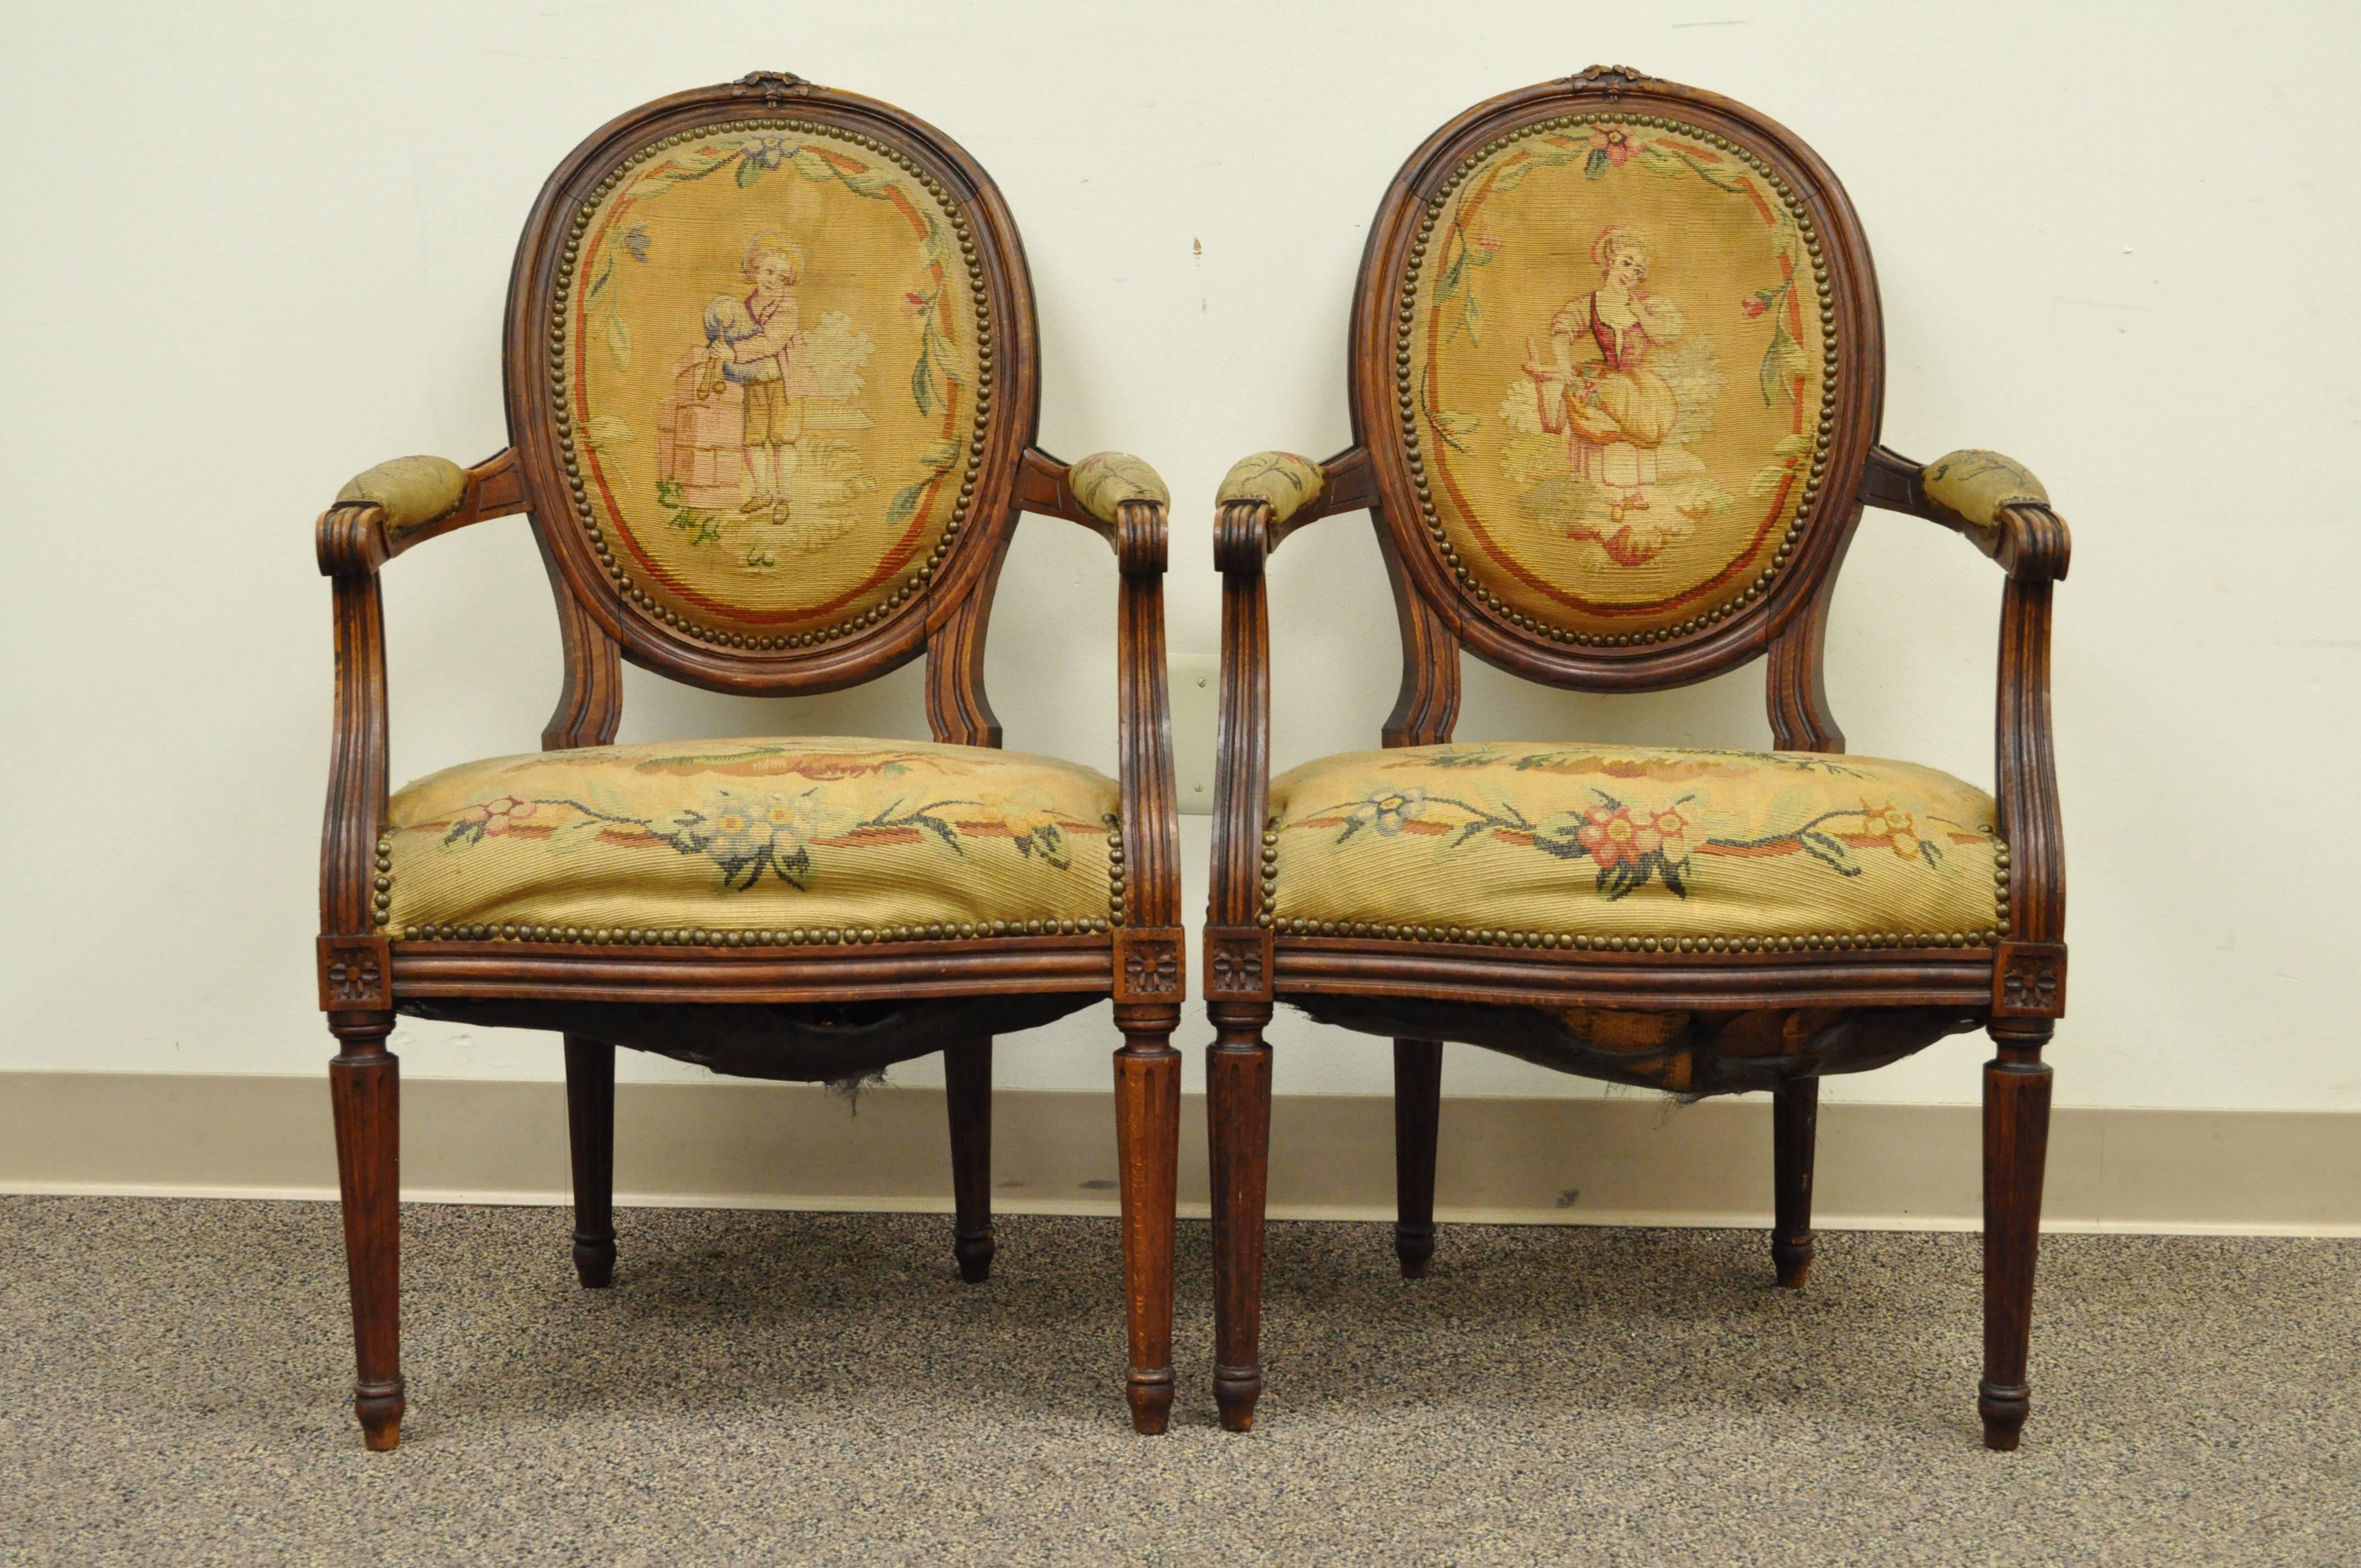 Pair of French 19th century Louis XVI style walnut armchairs with original needlepoint upholstery. Chairs feature padded arms, channel backs, bow carvings, fluted legs. Each chair has different needlepoint figures on the upholstered backs.